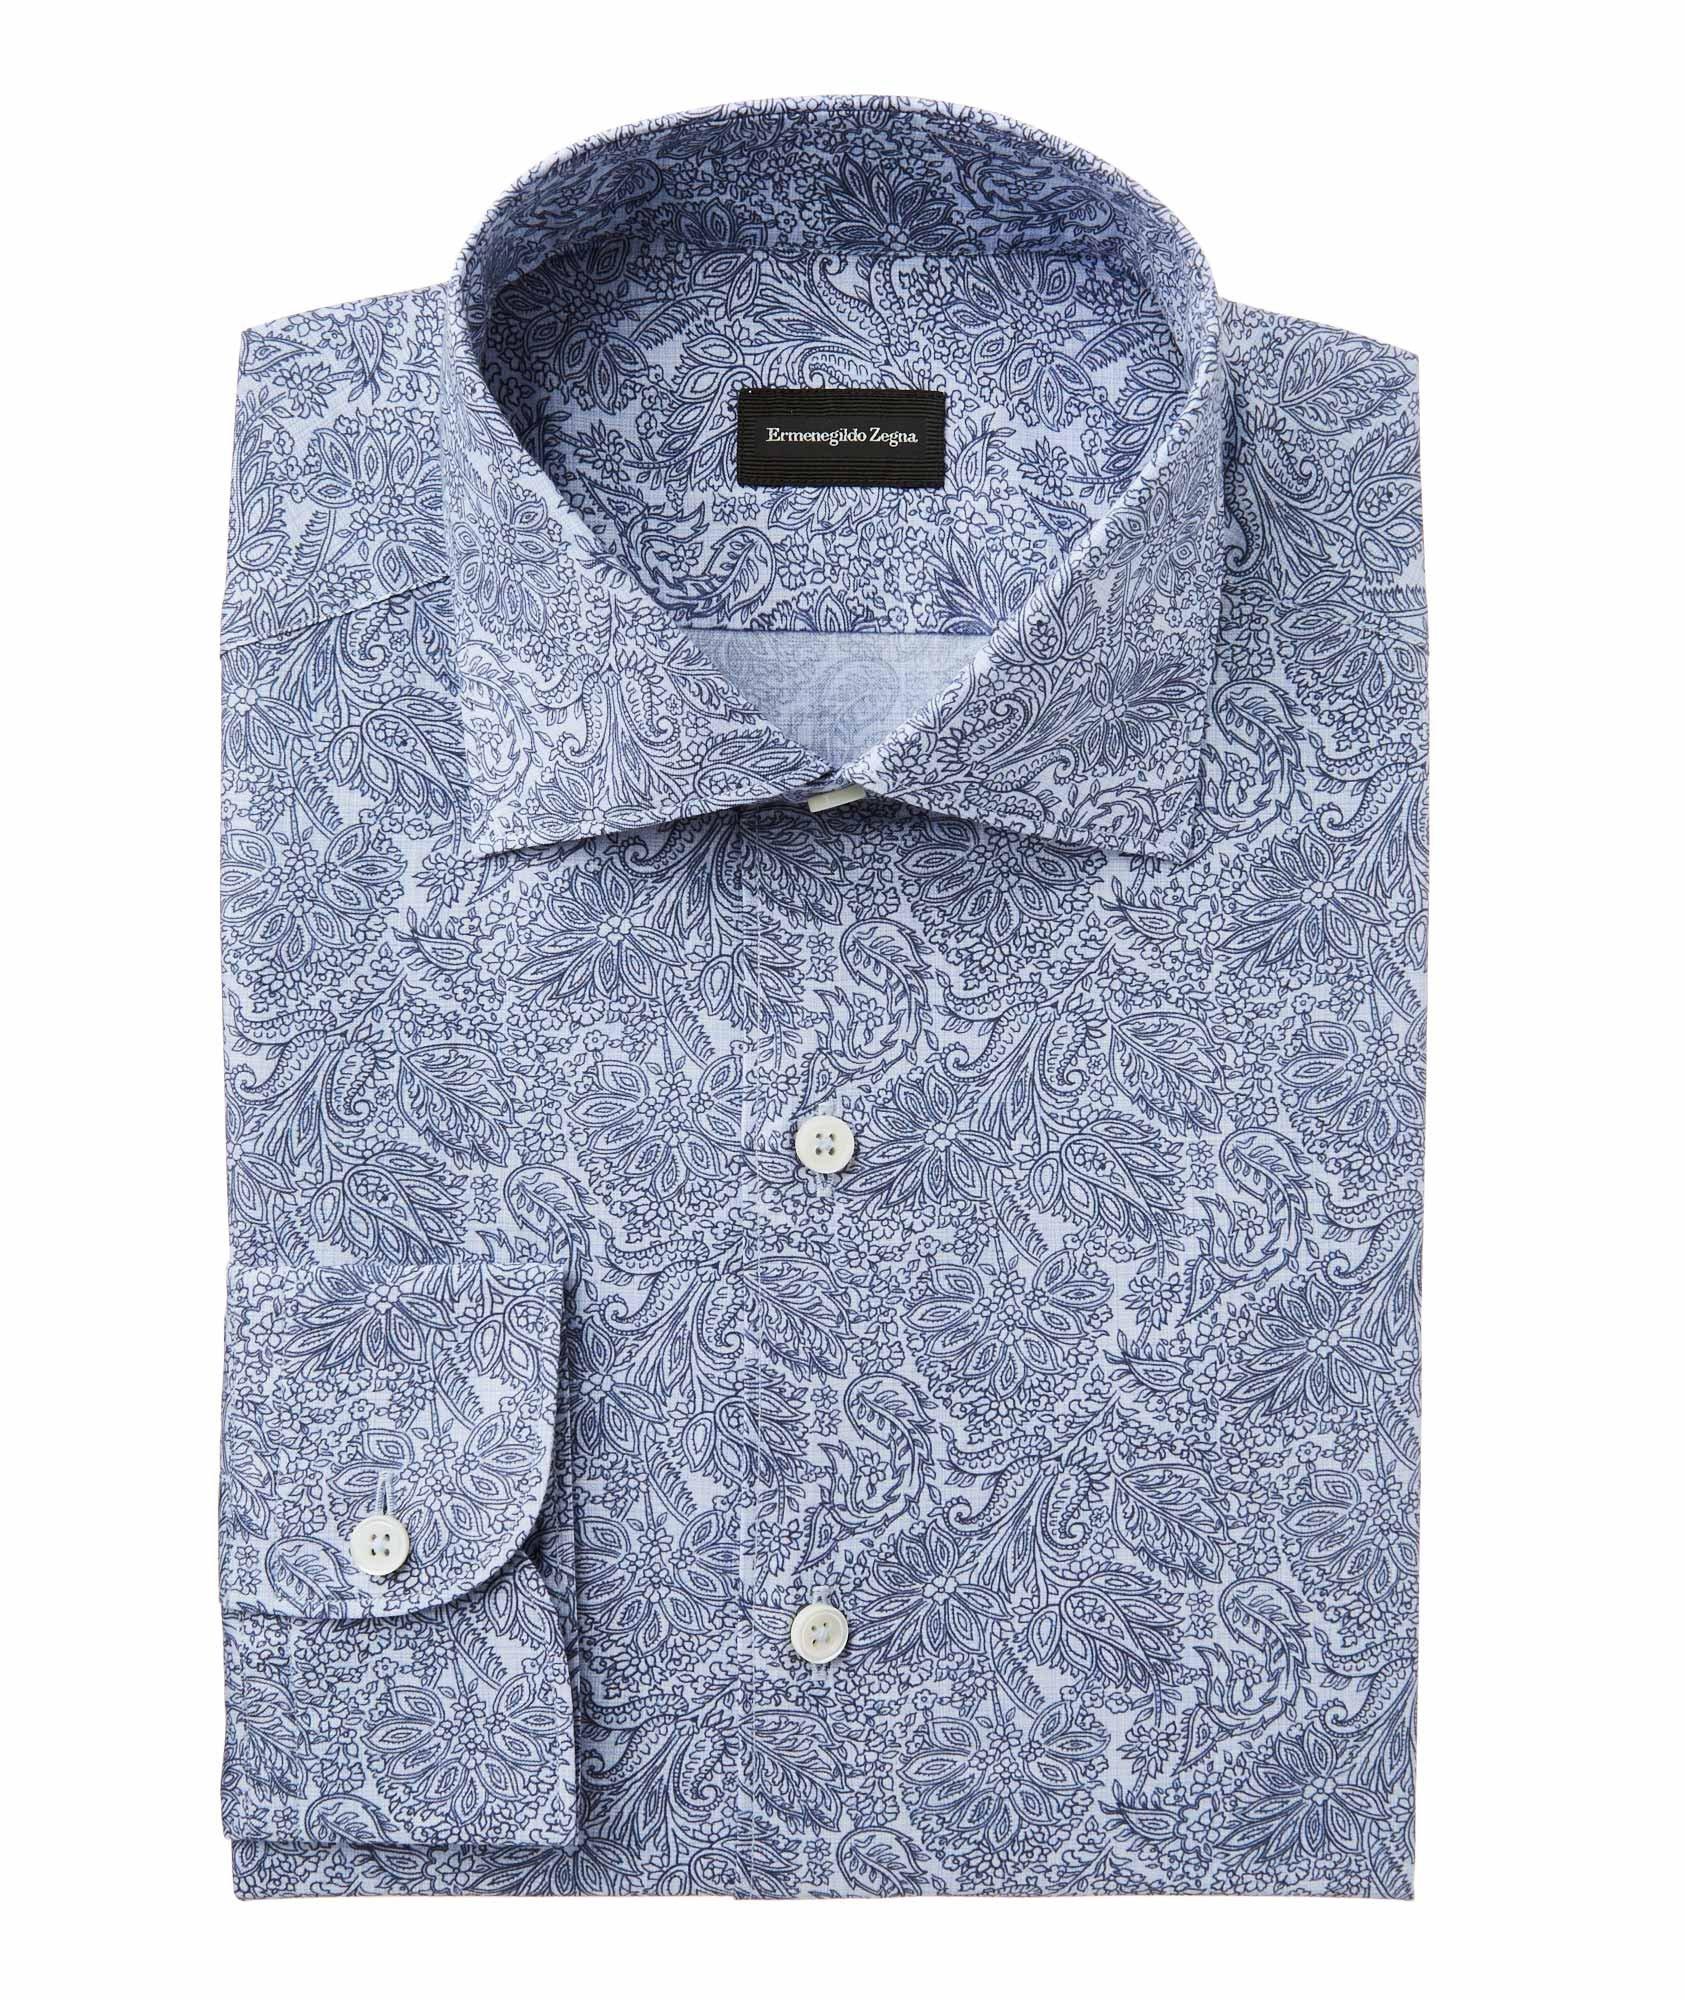 Classic Fit Printed Cotton Shirt image 0